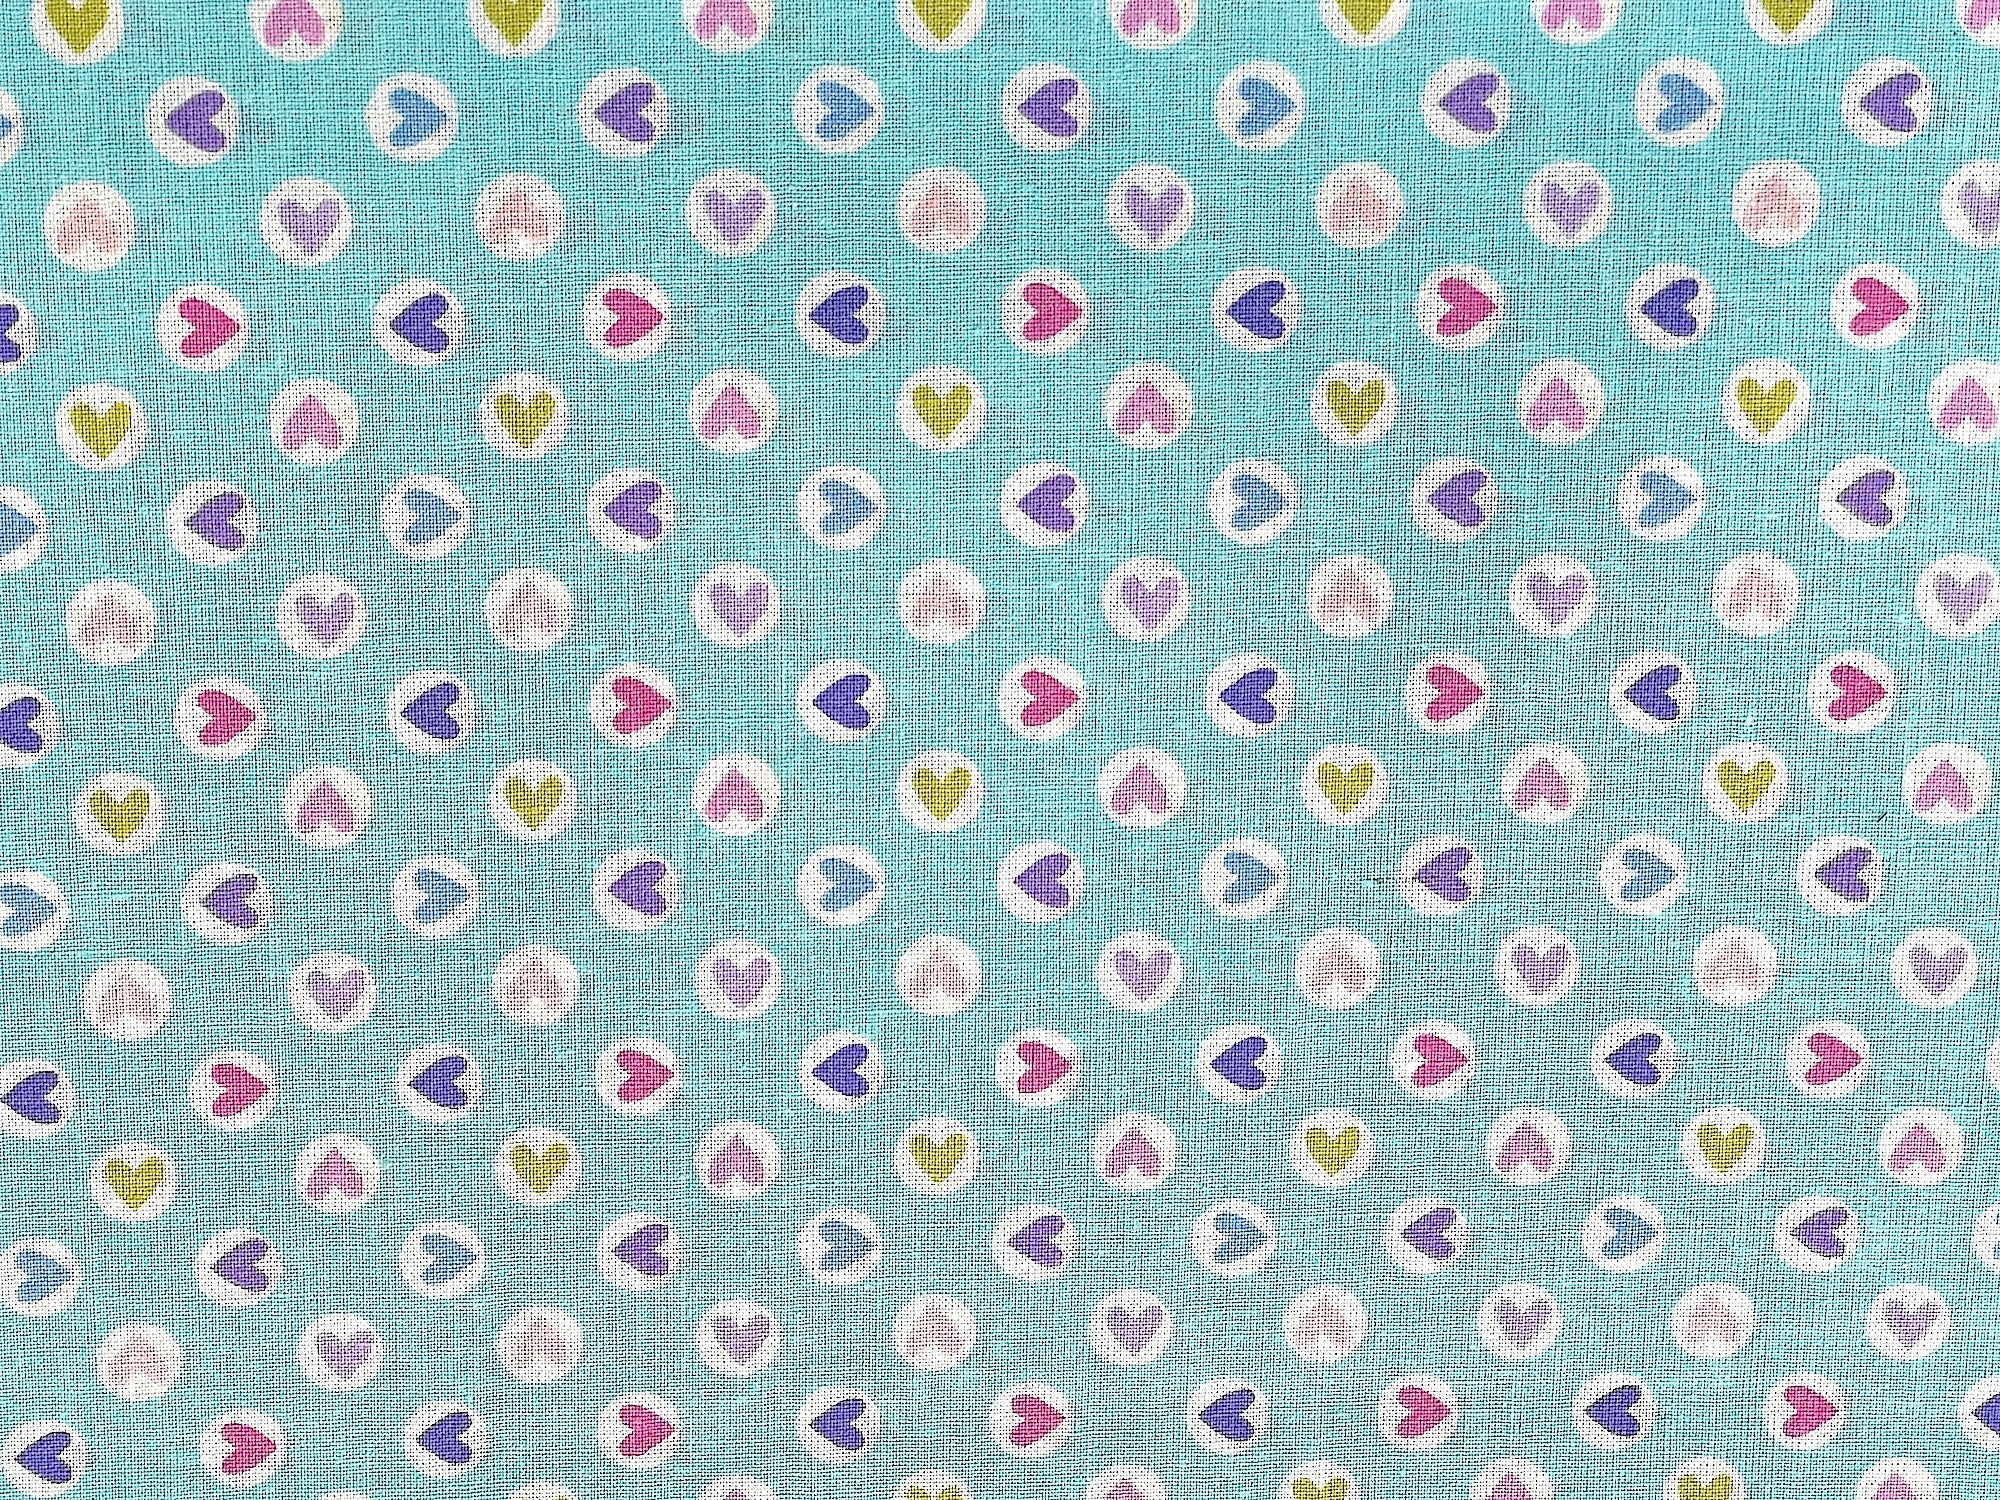 Turquoise colored fabric with different colored hearts within a white circle.